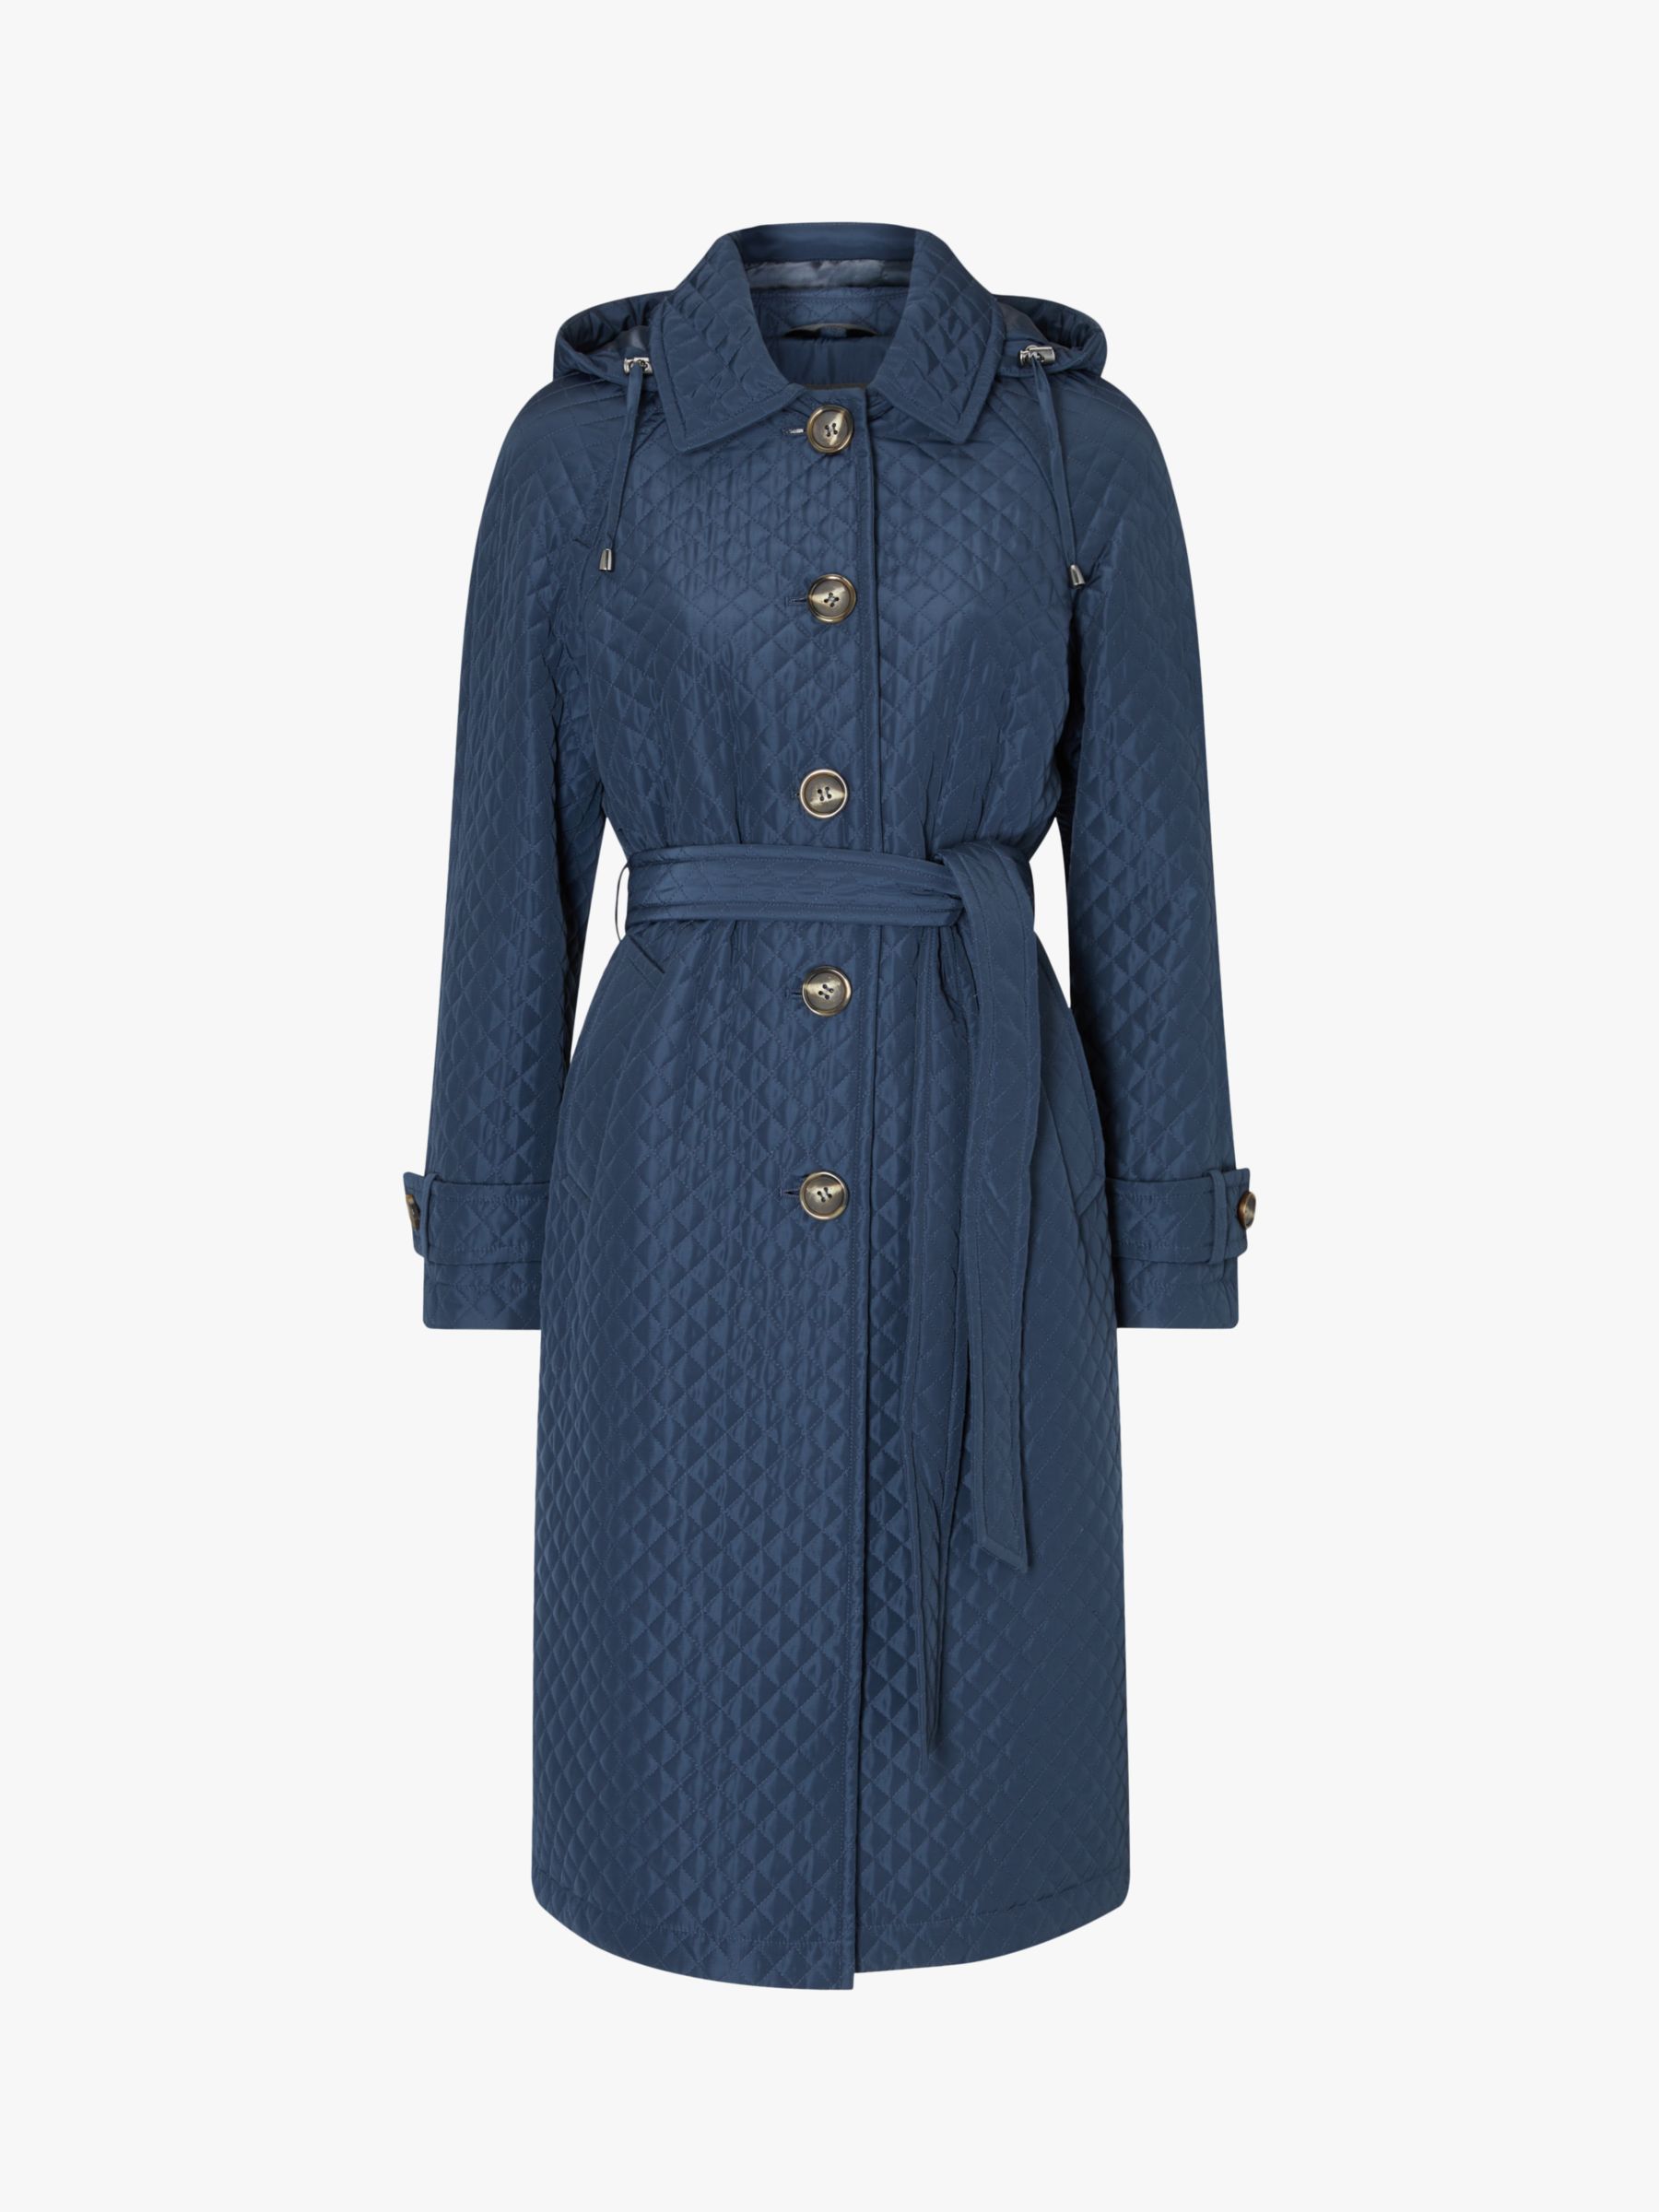 Four Seasons Quilted Trench Coat, Navy at John Lewis & Partners